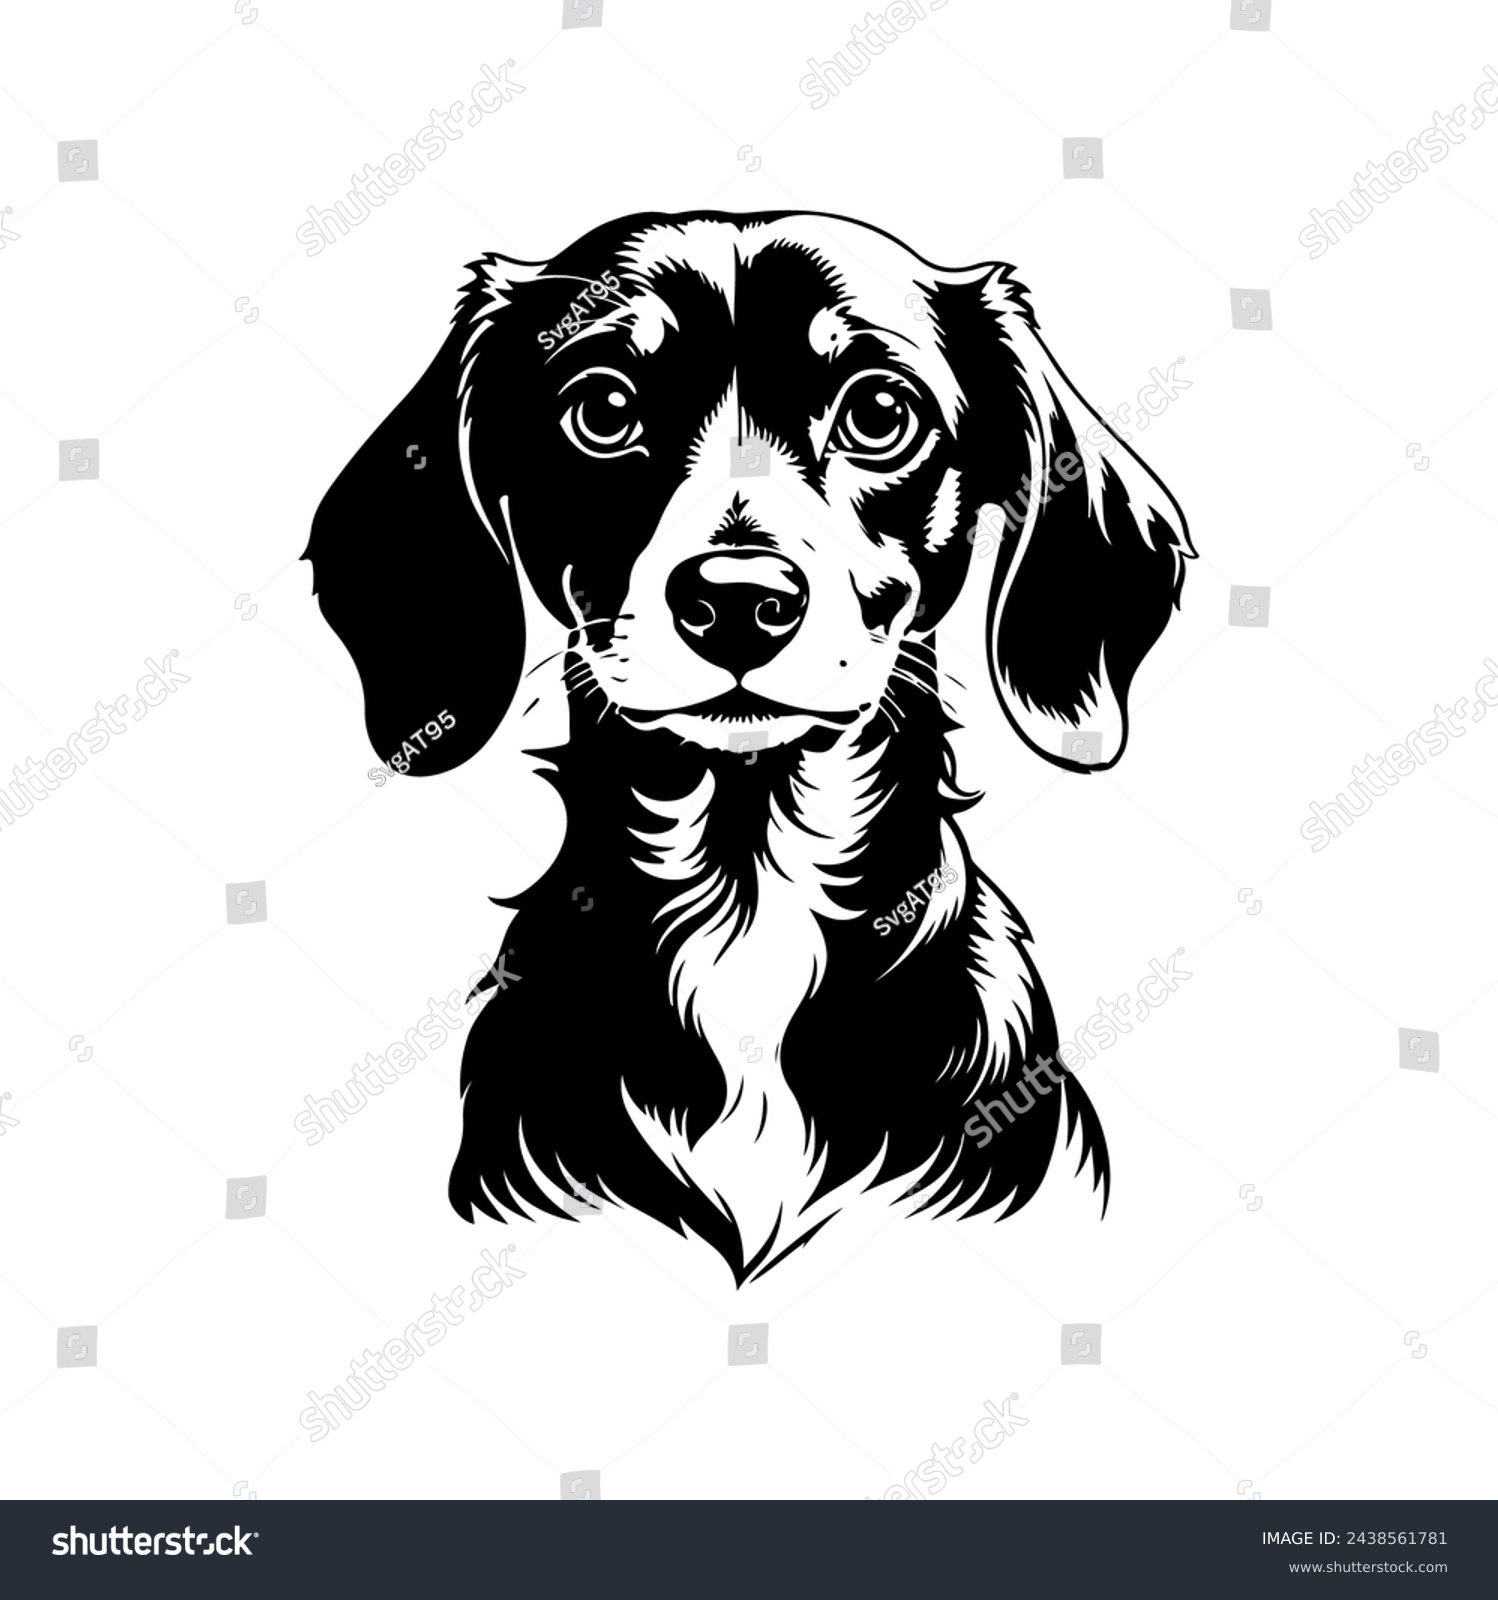 SVG of Portrait of a Dachshund Dog Vector isolated on white background, Dog Silhouettes. svg